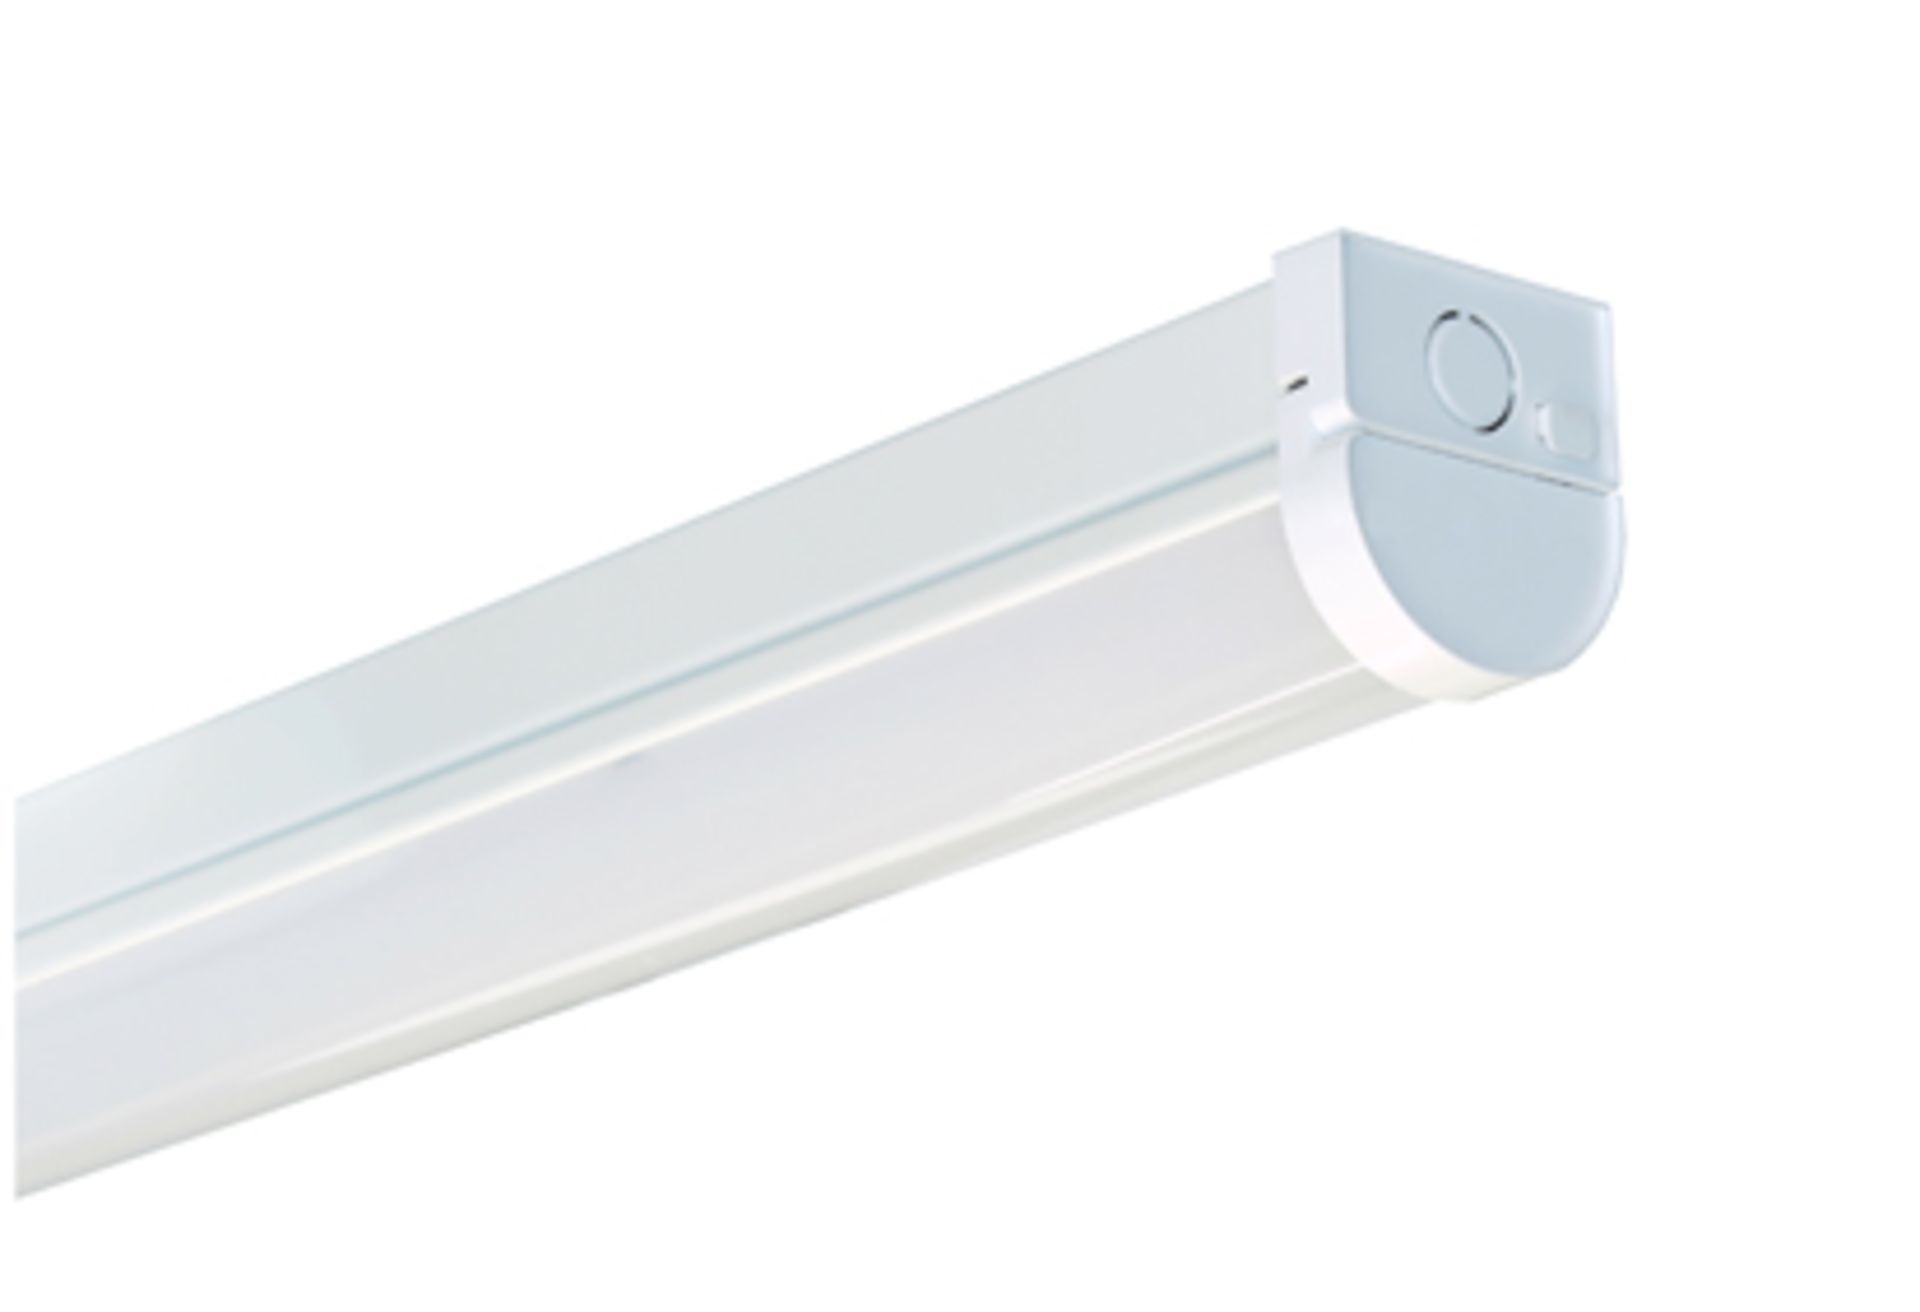 Approx 165 60w 7200LM LED Battens, 1500mm, product code T4BAT7200 - Image 3 of 4